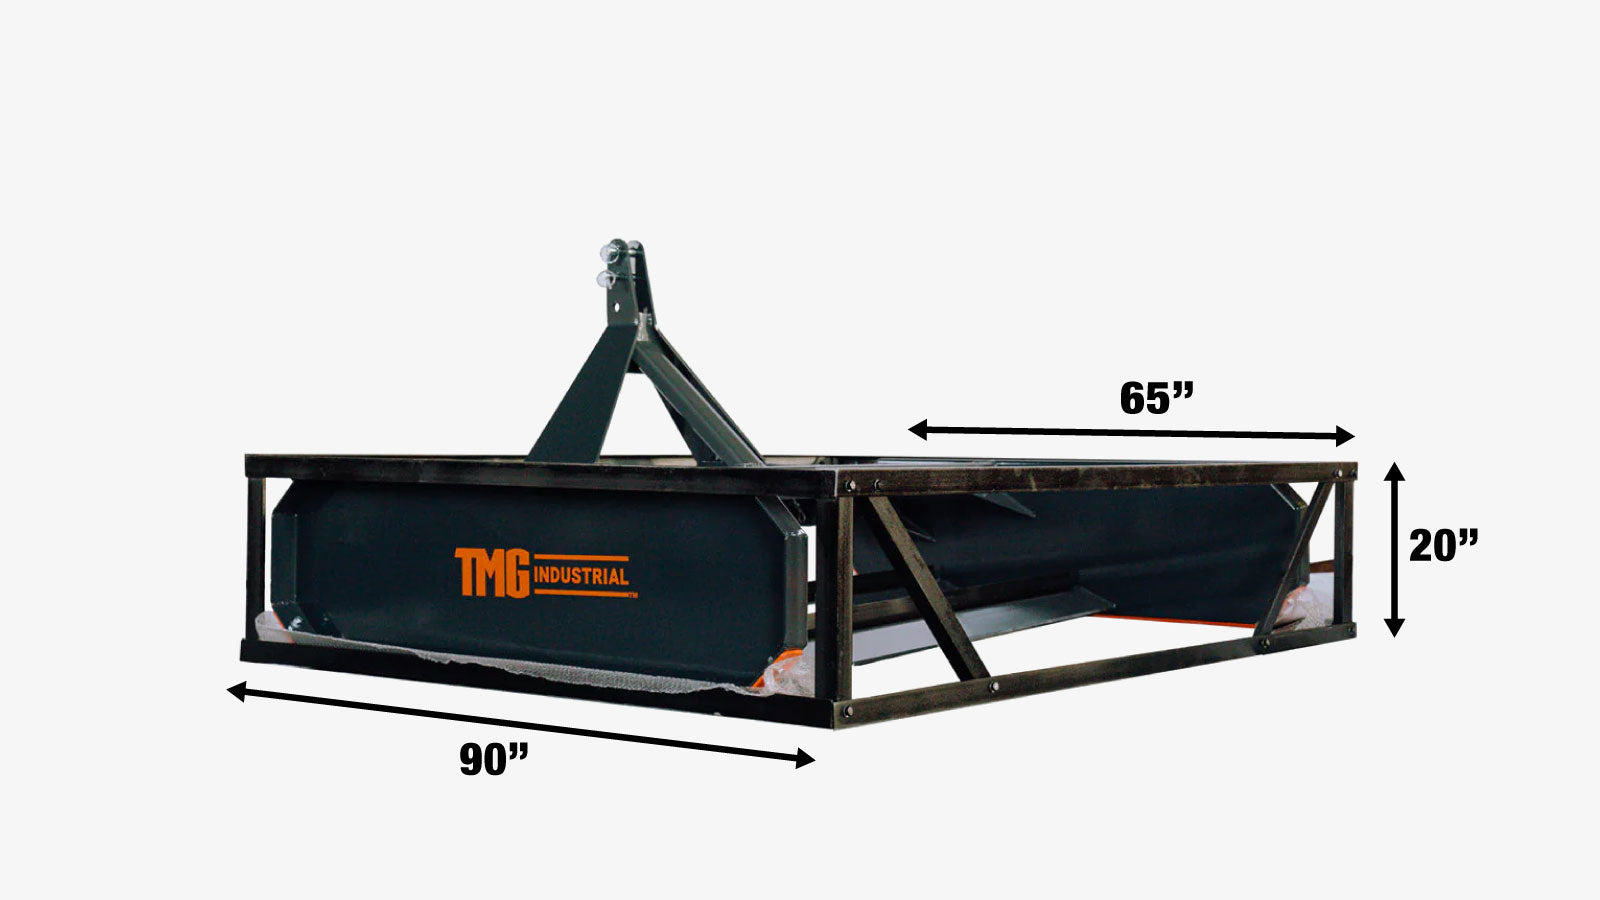 TMG Industrial 84” Tractor Land Leveler, 3-Point Hitch, 81” Grading Width, Adjustable Depth, Double Edge Blades, Category 1 & 2, TMG-TLL84-shipping-info-image